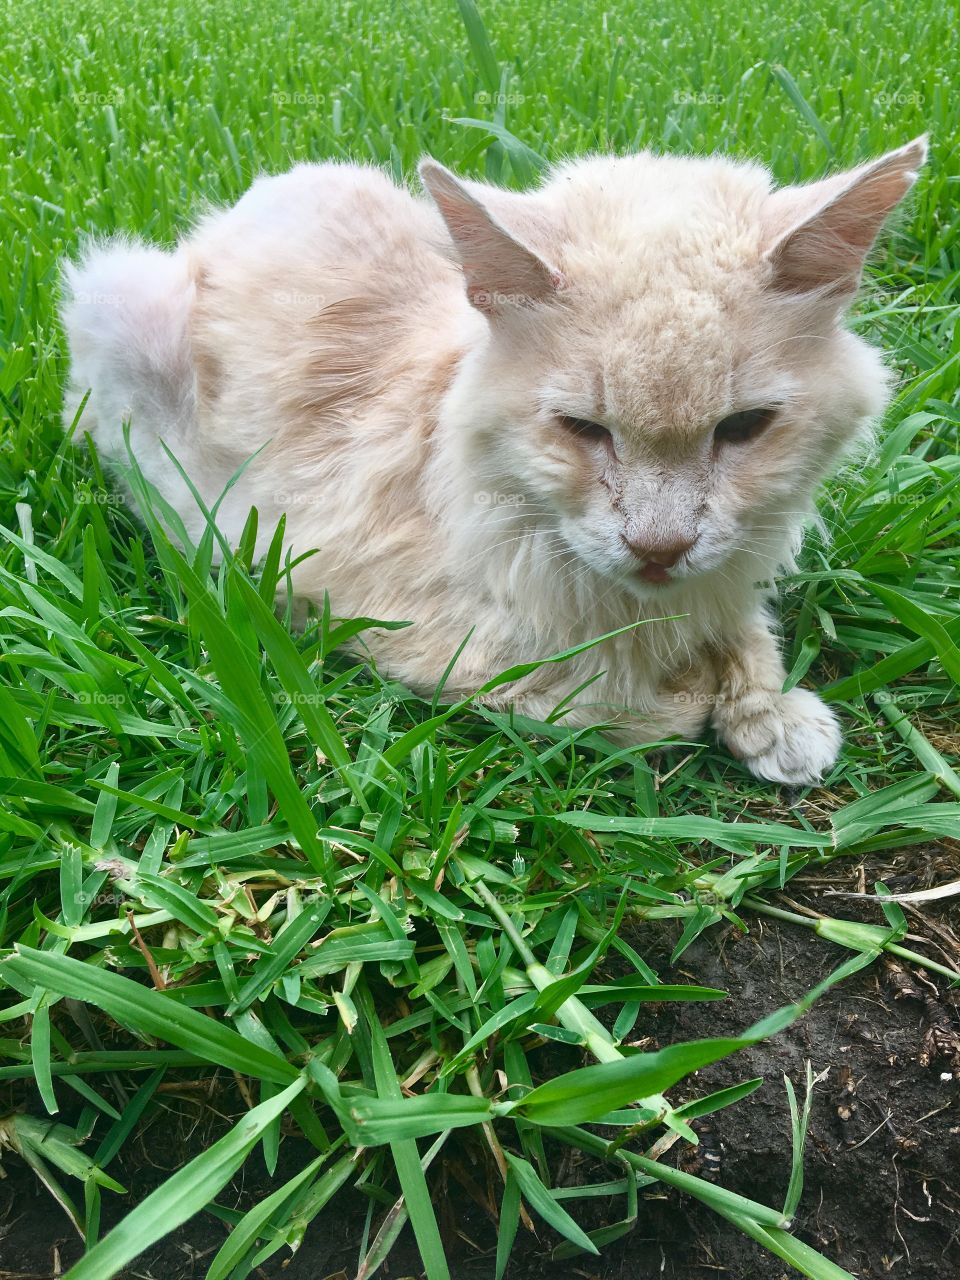 Kitty laying in grass 